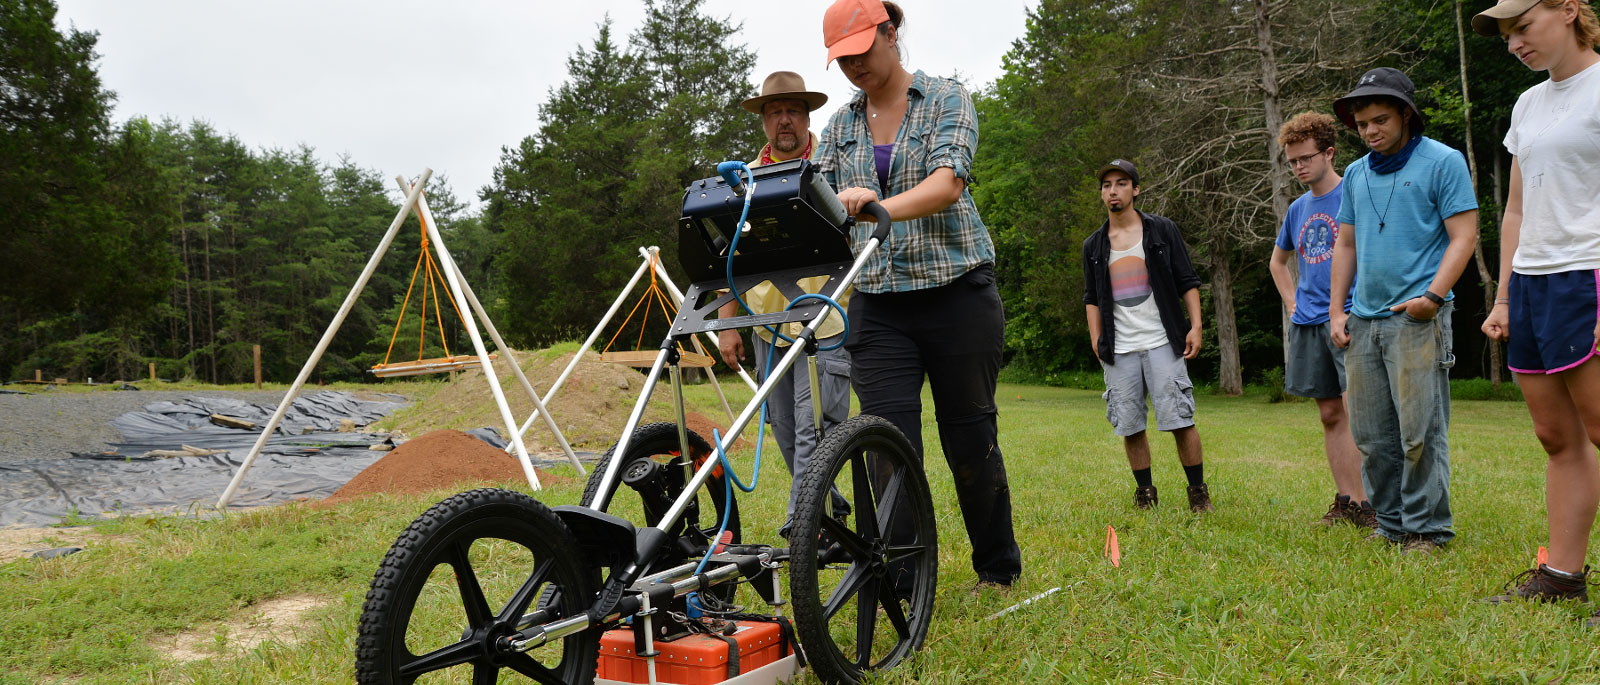 v.c.u. student jesse adkins pushes a ground-penetrating radar device to search for buried anomolies at the Fort Germanna/Enchanted Castle site